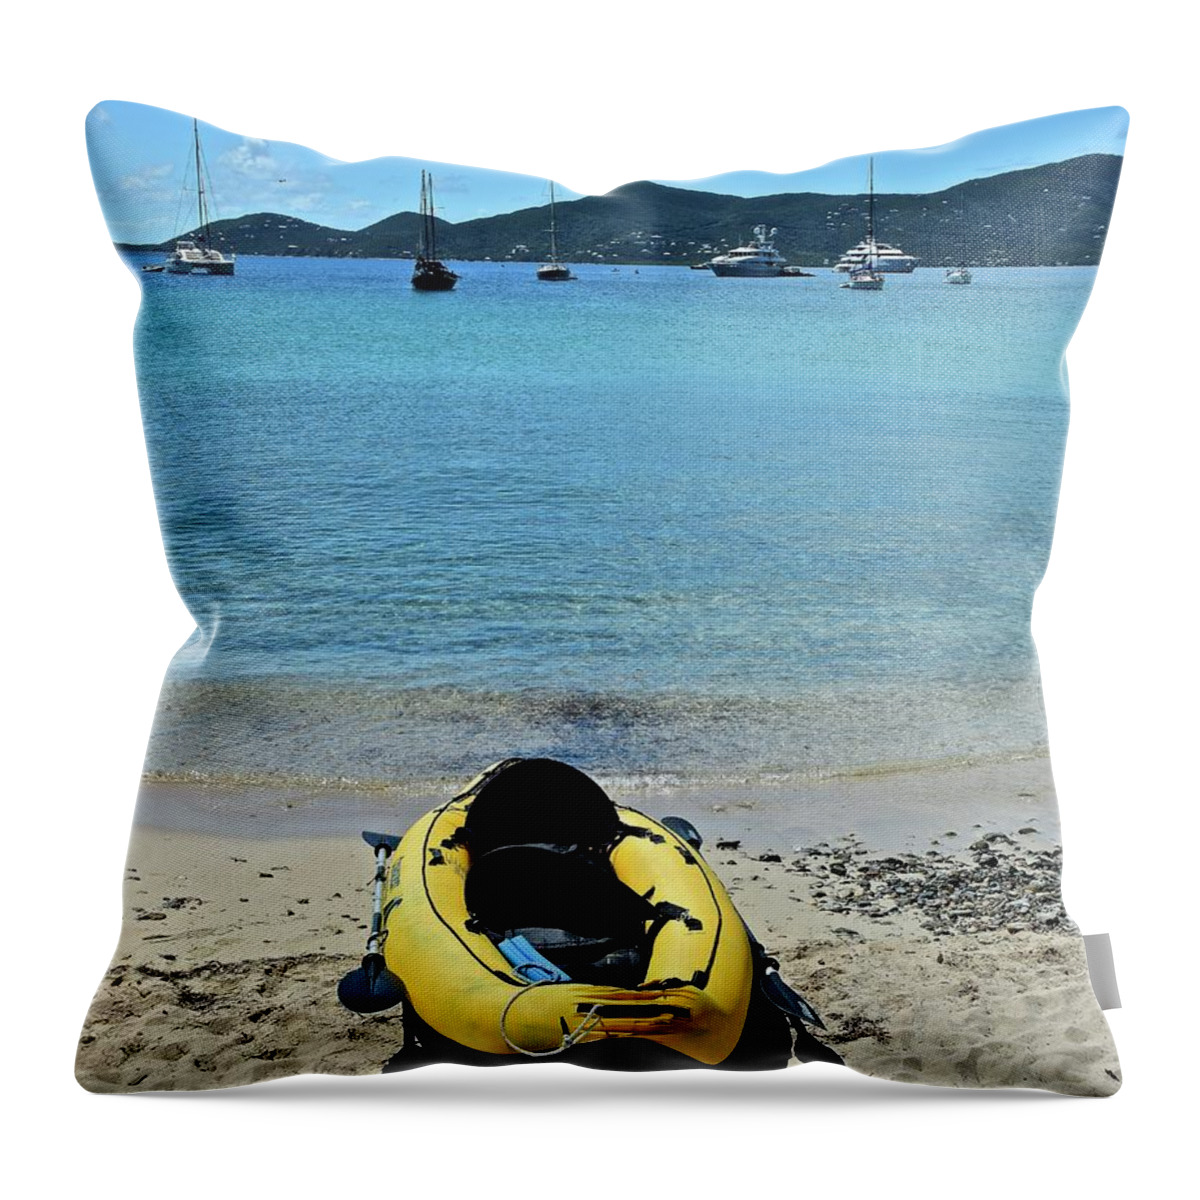 Tropical Throw Pillow featuring the photograph The Resting Spot #1 by Frozen in Time Fine Art Photography